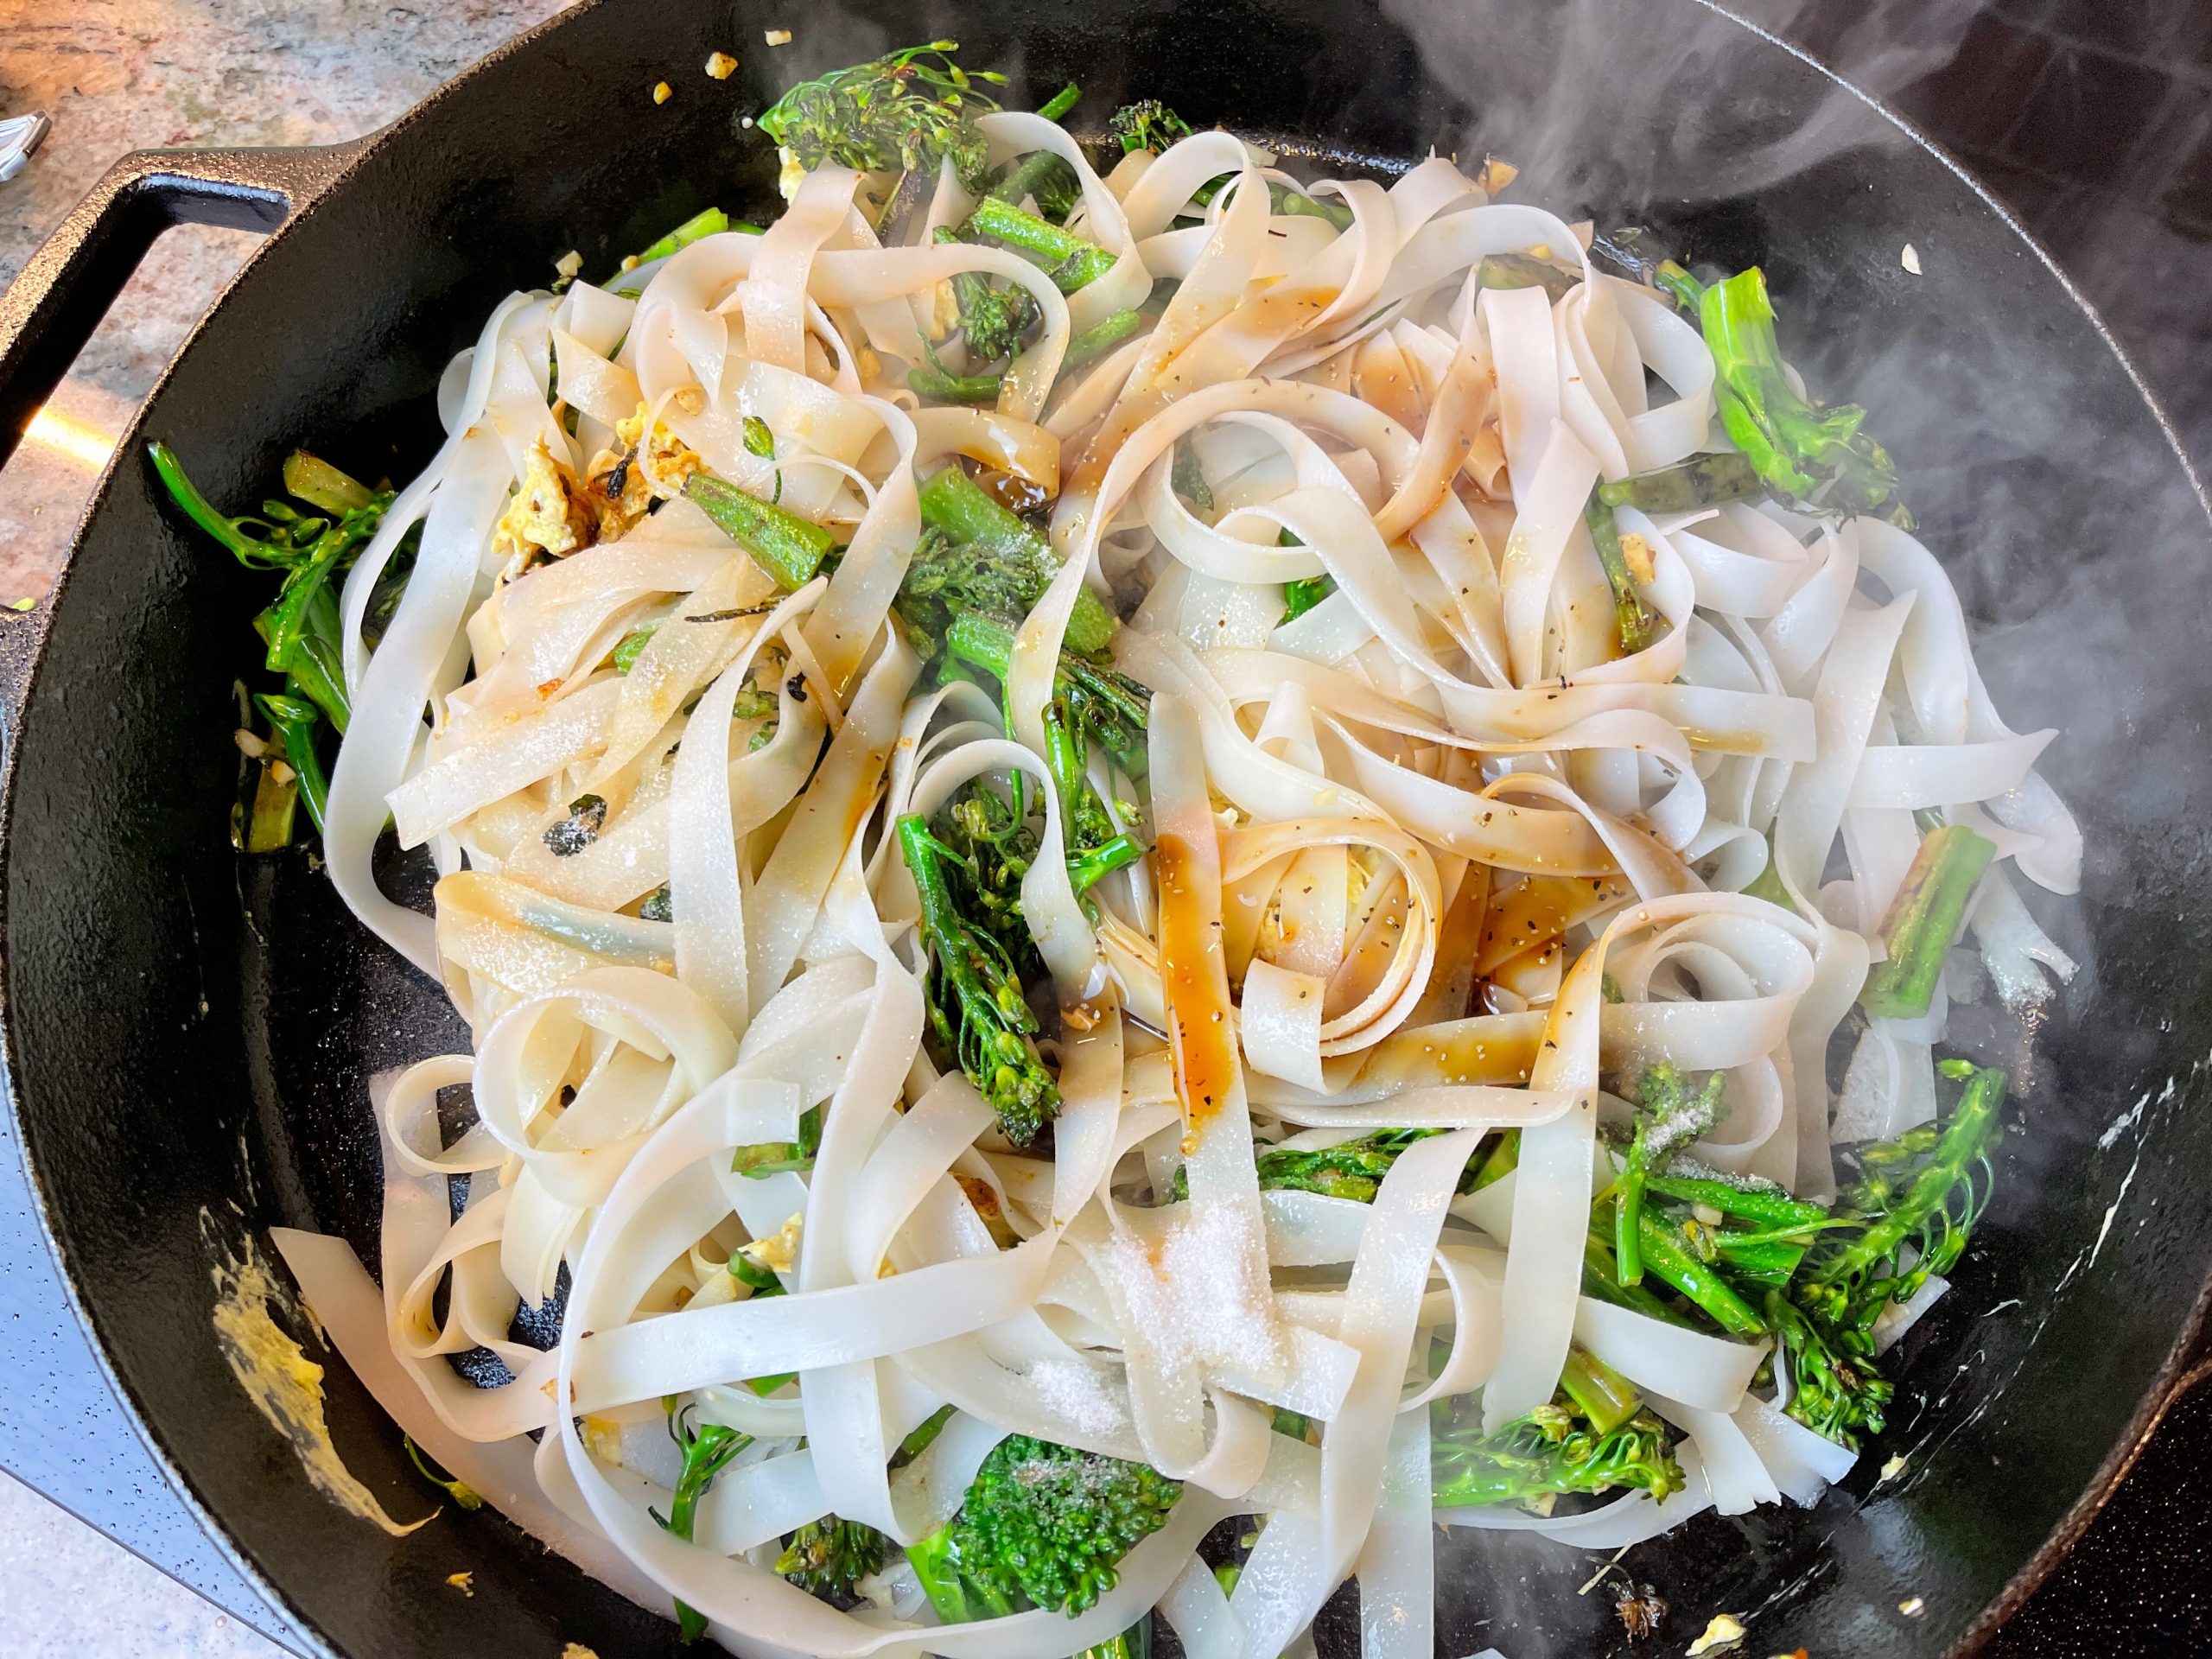 Once noodles are mixed in and heated through, add the sugar and sauce. Mix together with tongs.